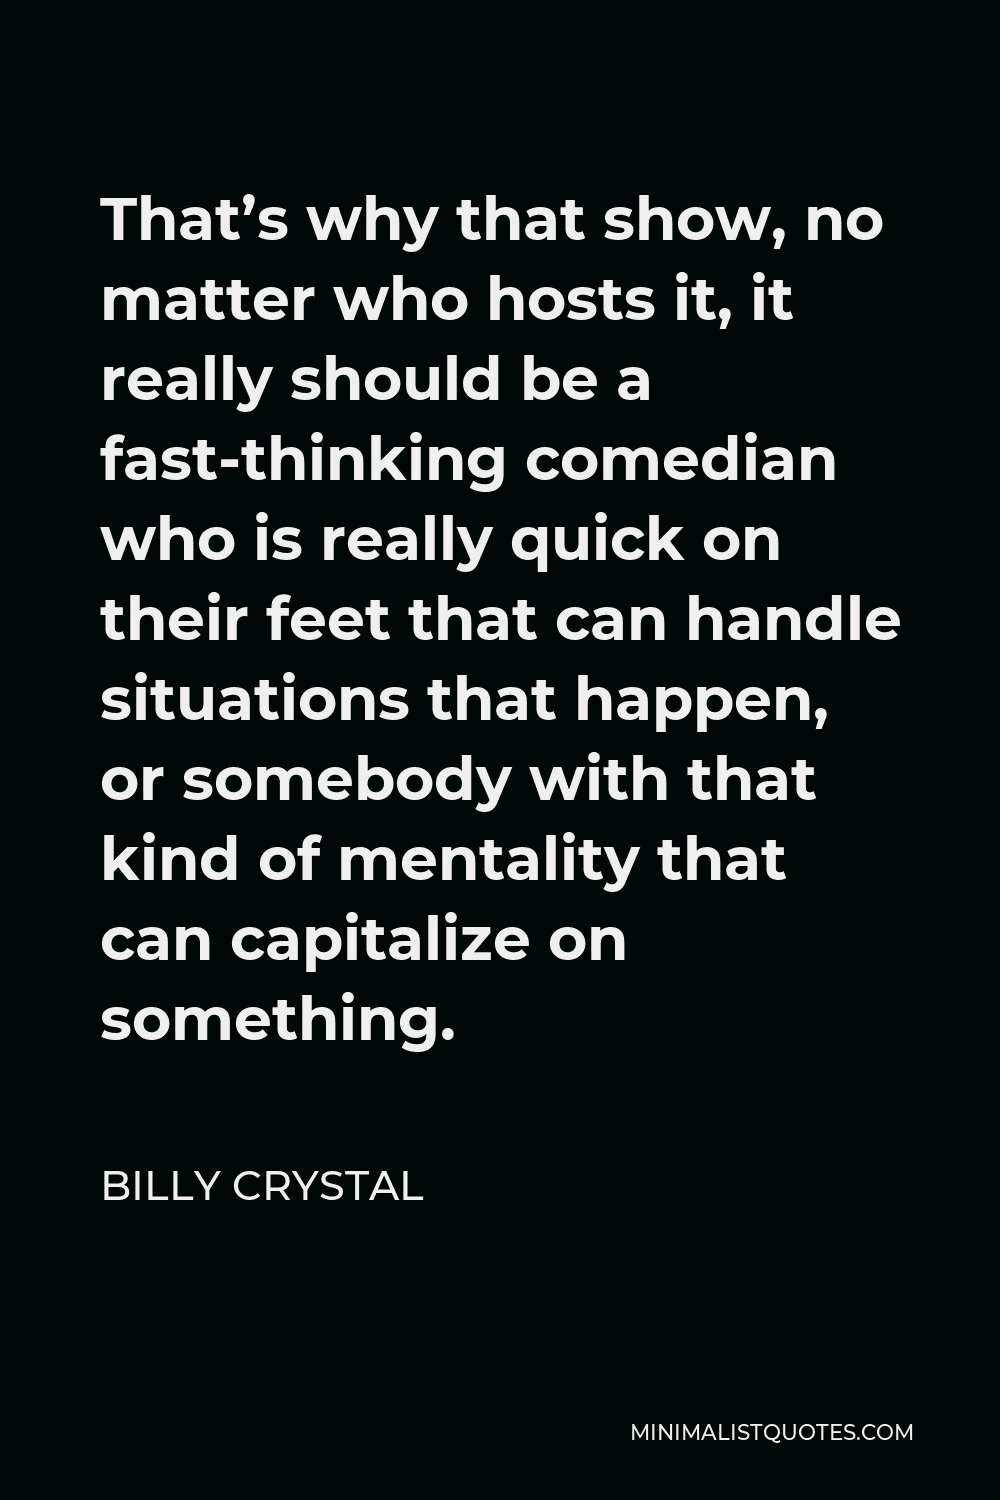 Billy Crystal Quote - That’s why that show, no matter who hosts it, it really should be a fast-thinking comedian who is really quick on their feet that can handle situations that happen, or somebody with that kind of mentality that can capitalize on something.